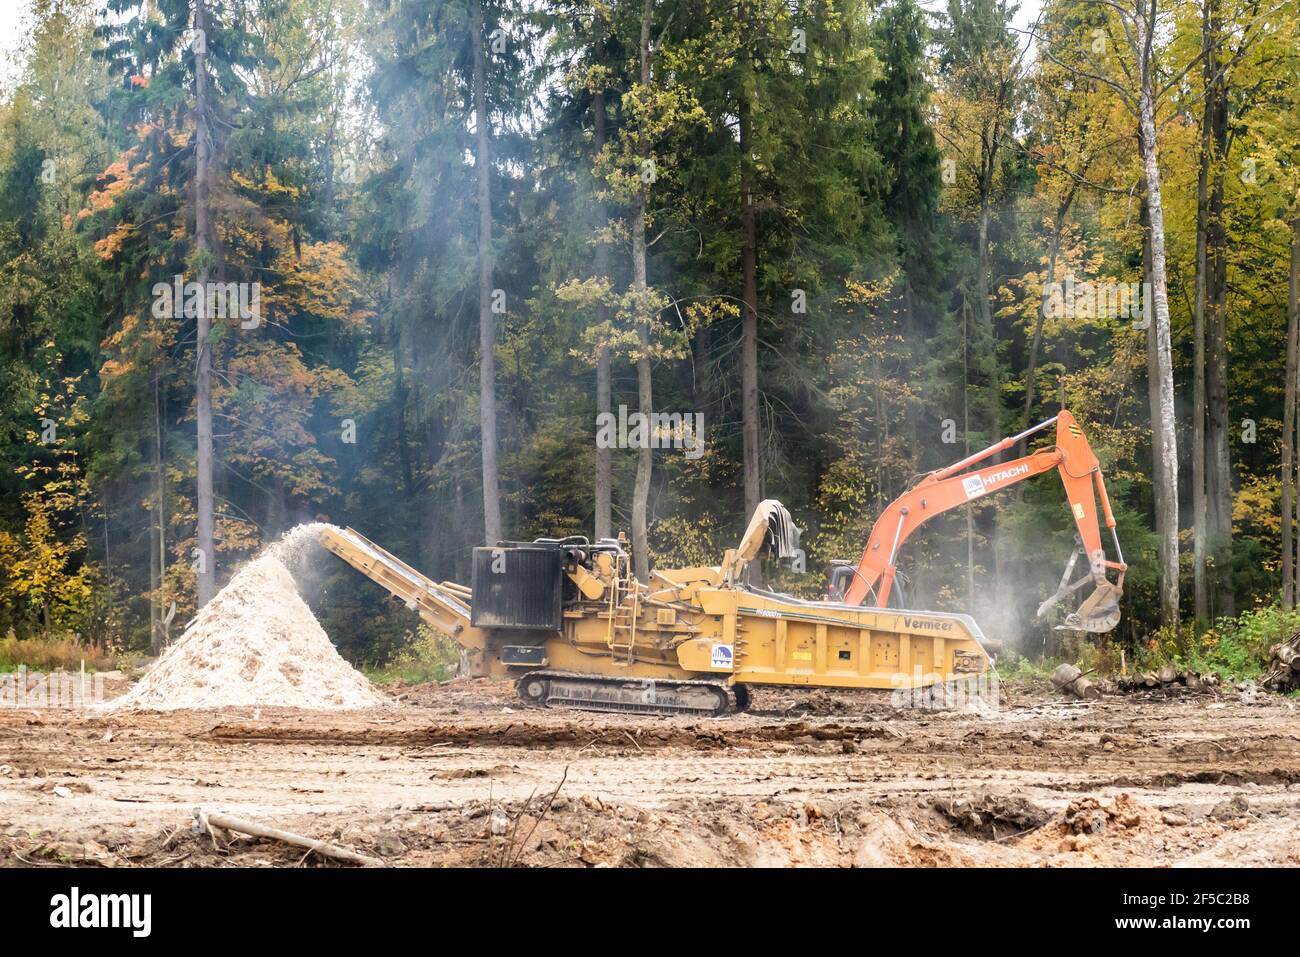 Moscow oblast. Russia. Autumn 2019. Industrial wood chopper at work. Construction of a large highway. Stock Photo